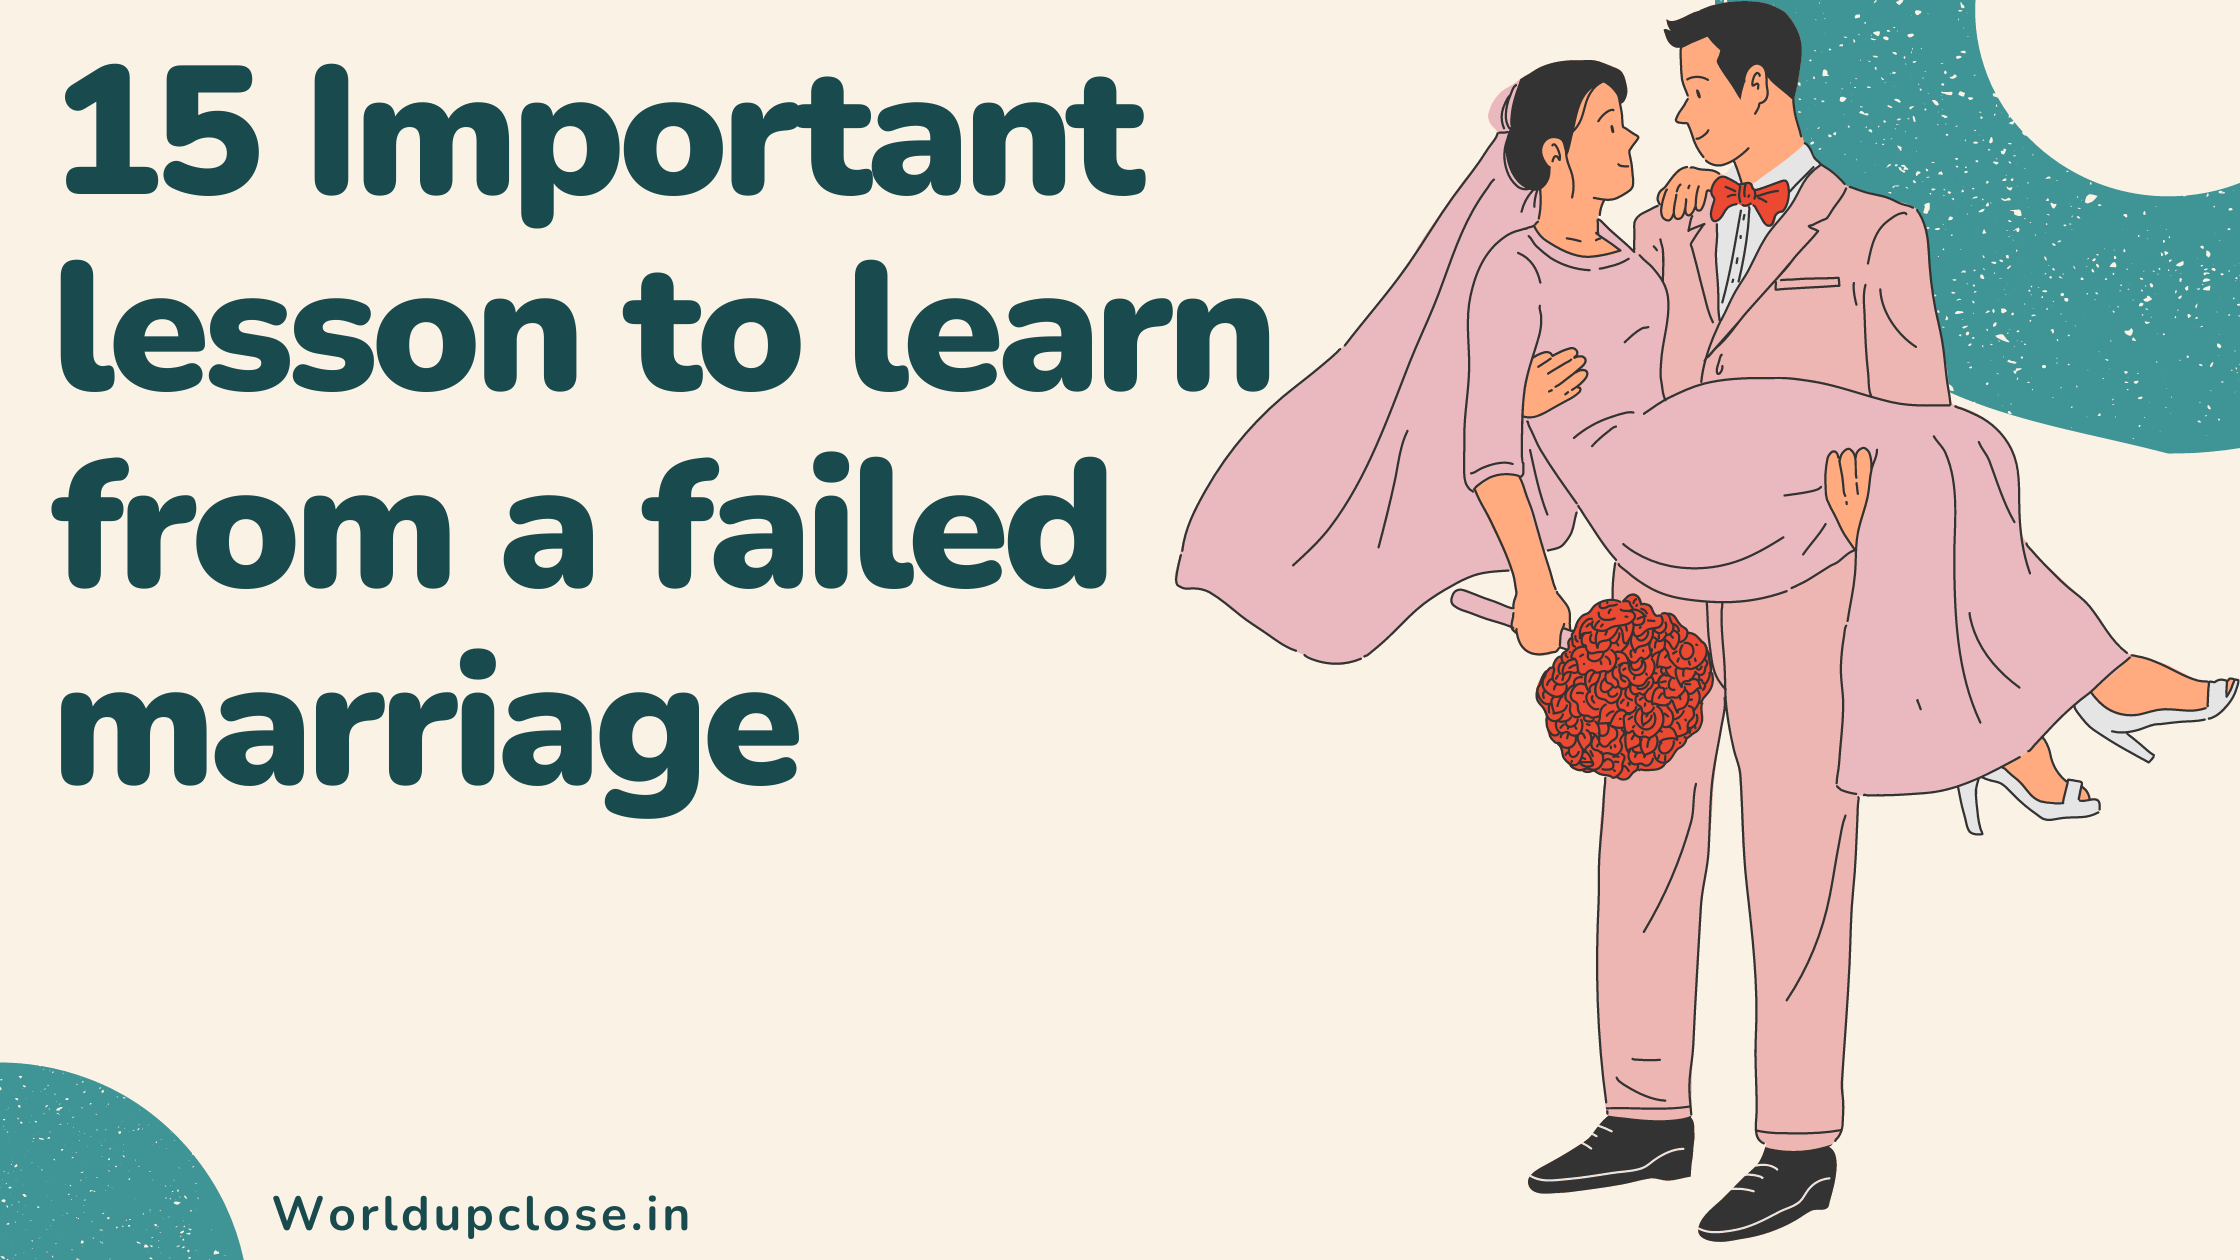 15 Important lesson to learn from a failed marriage 4